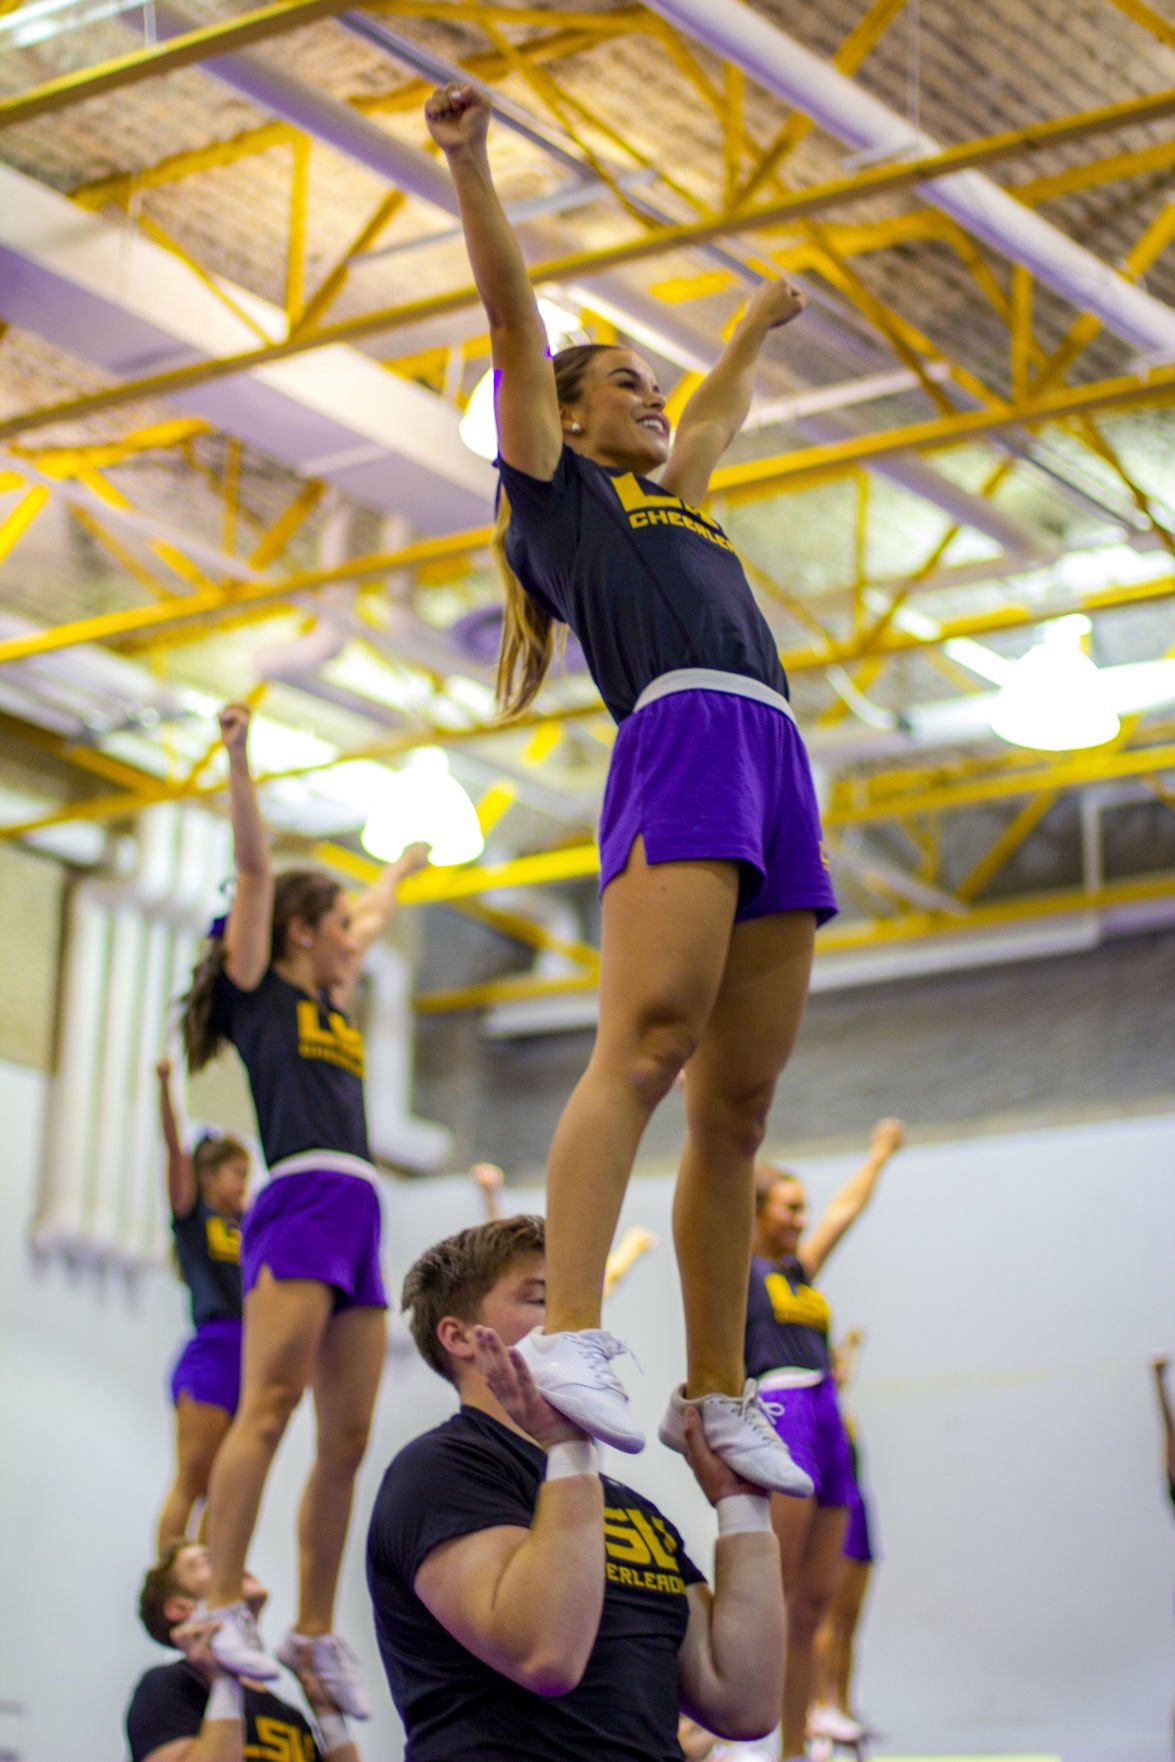 'It’s much greater than a sport' Behind the scenes of LSU Cheer